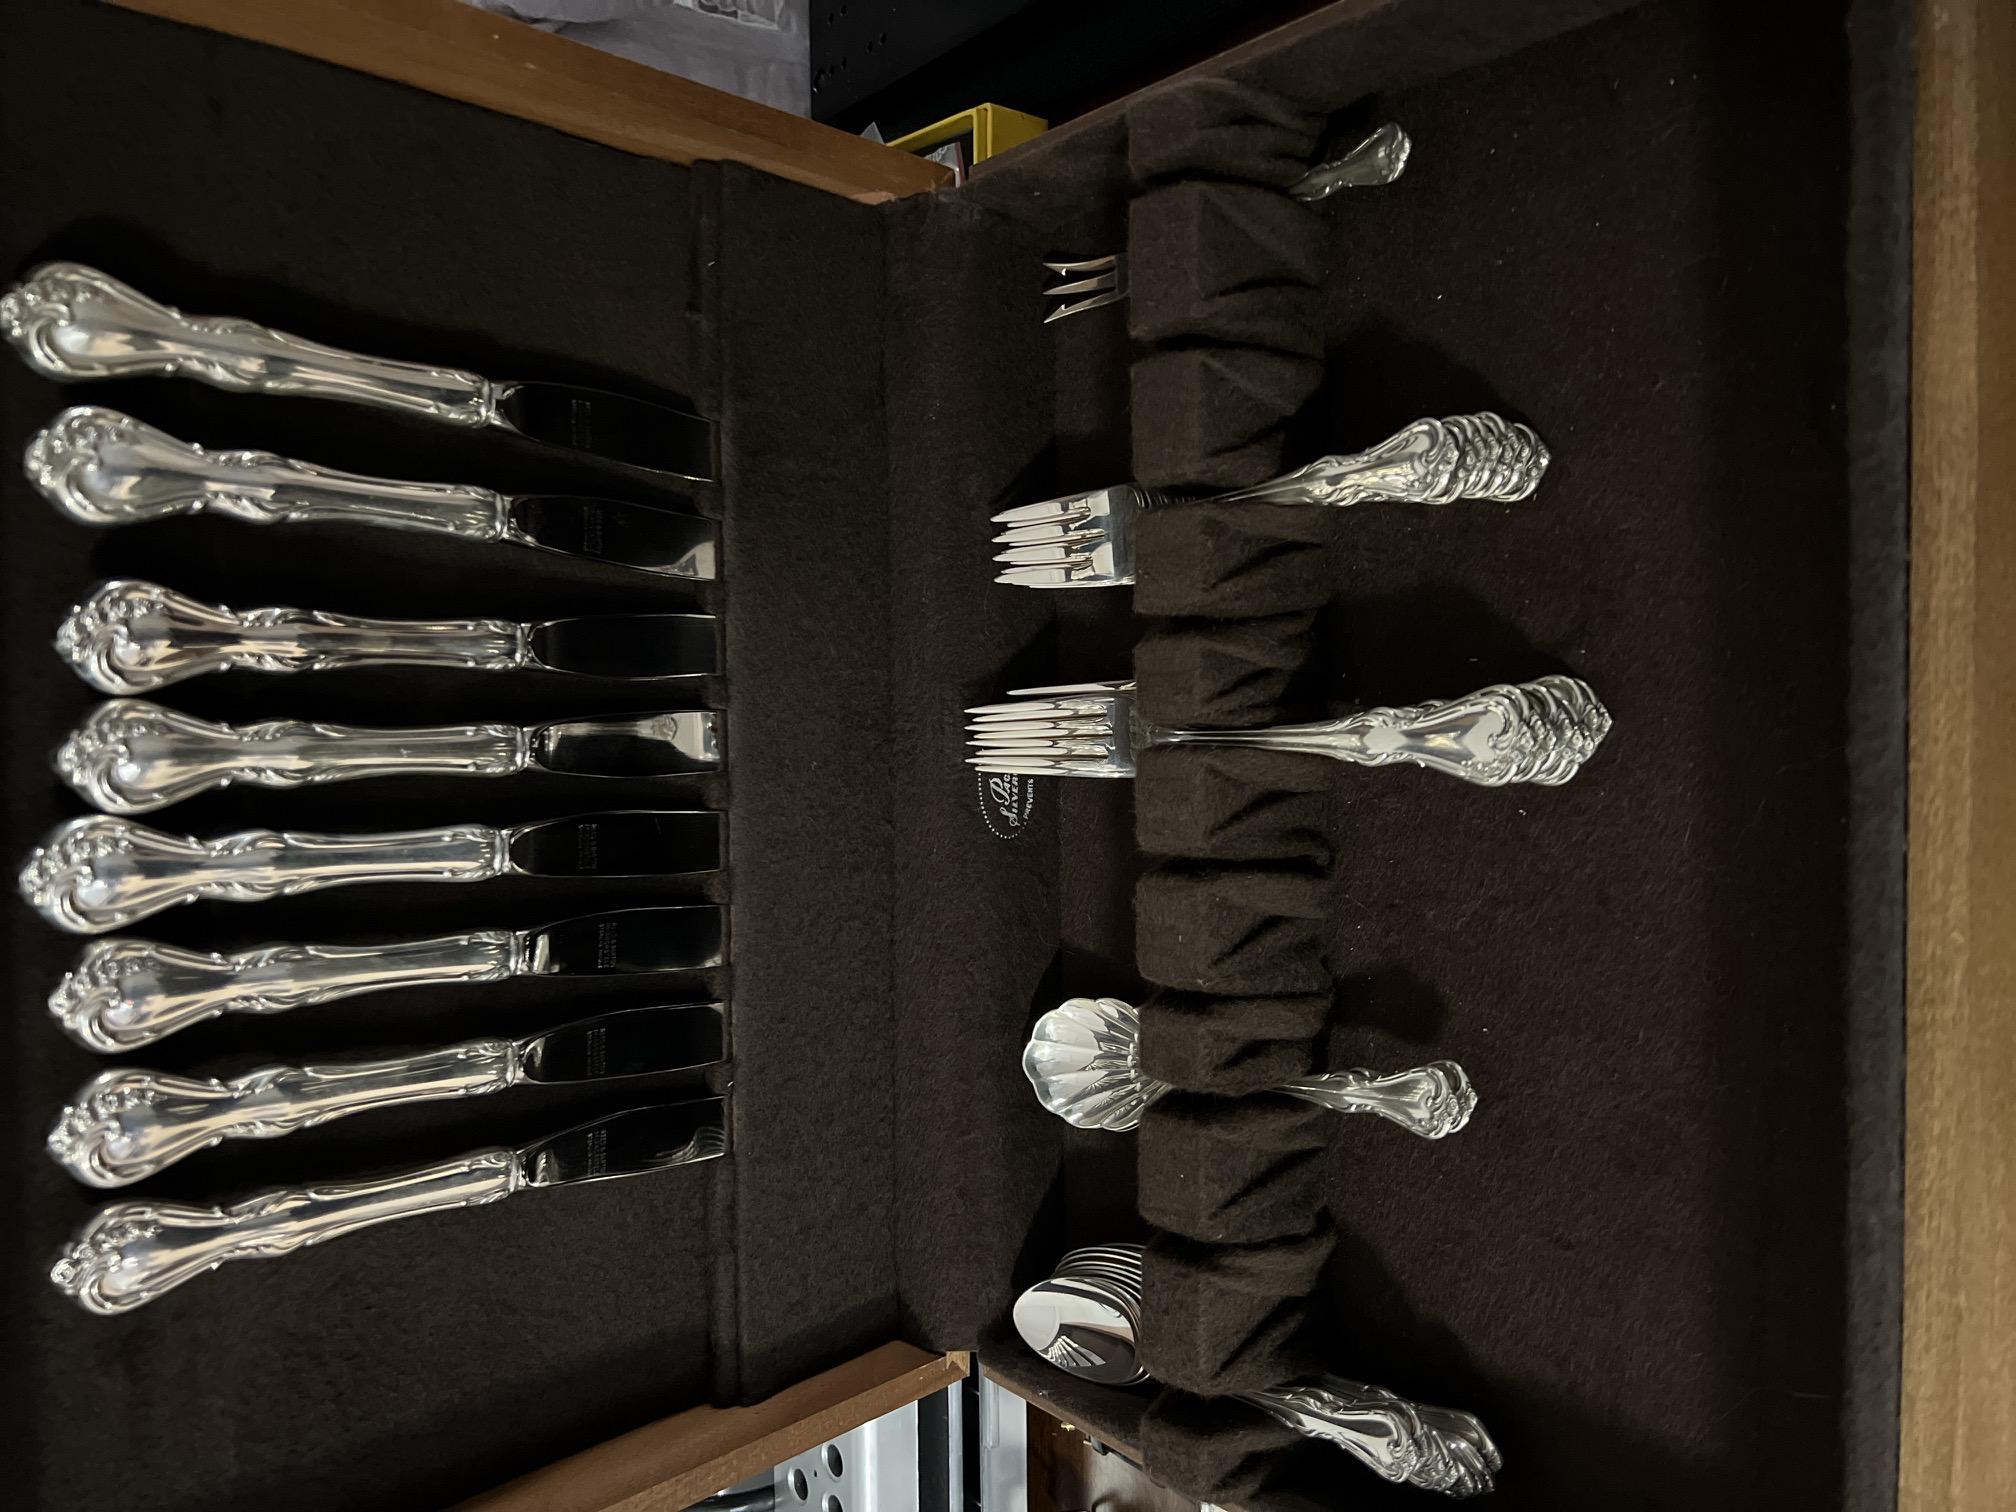 Welcome to my corner of 1stDibs. While I a soft spot for vintage watches, I have a “Reed and Barton sterling silver flatware set with box.  It was given to my family around 1971. Let’s get a bit of history on Reed and Barton. 
The Reed & Barton